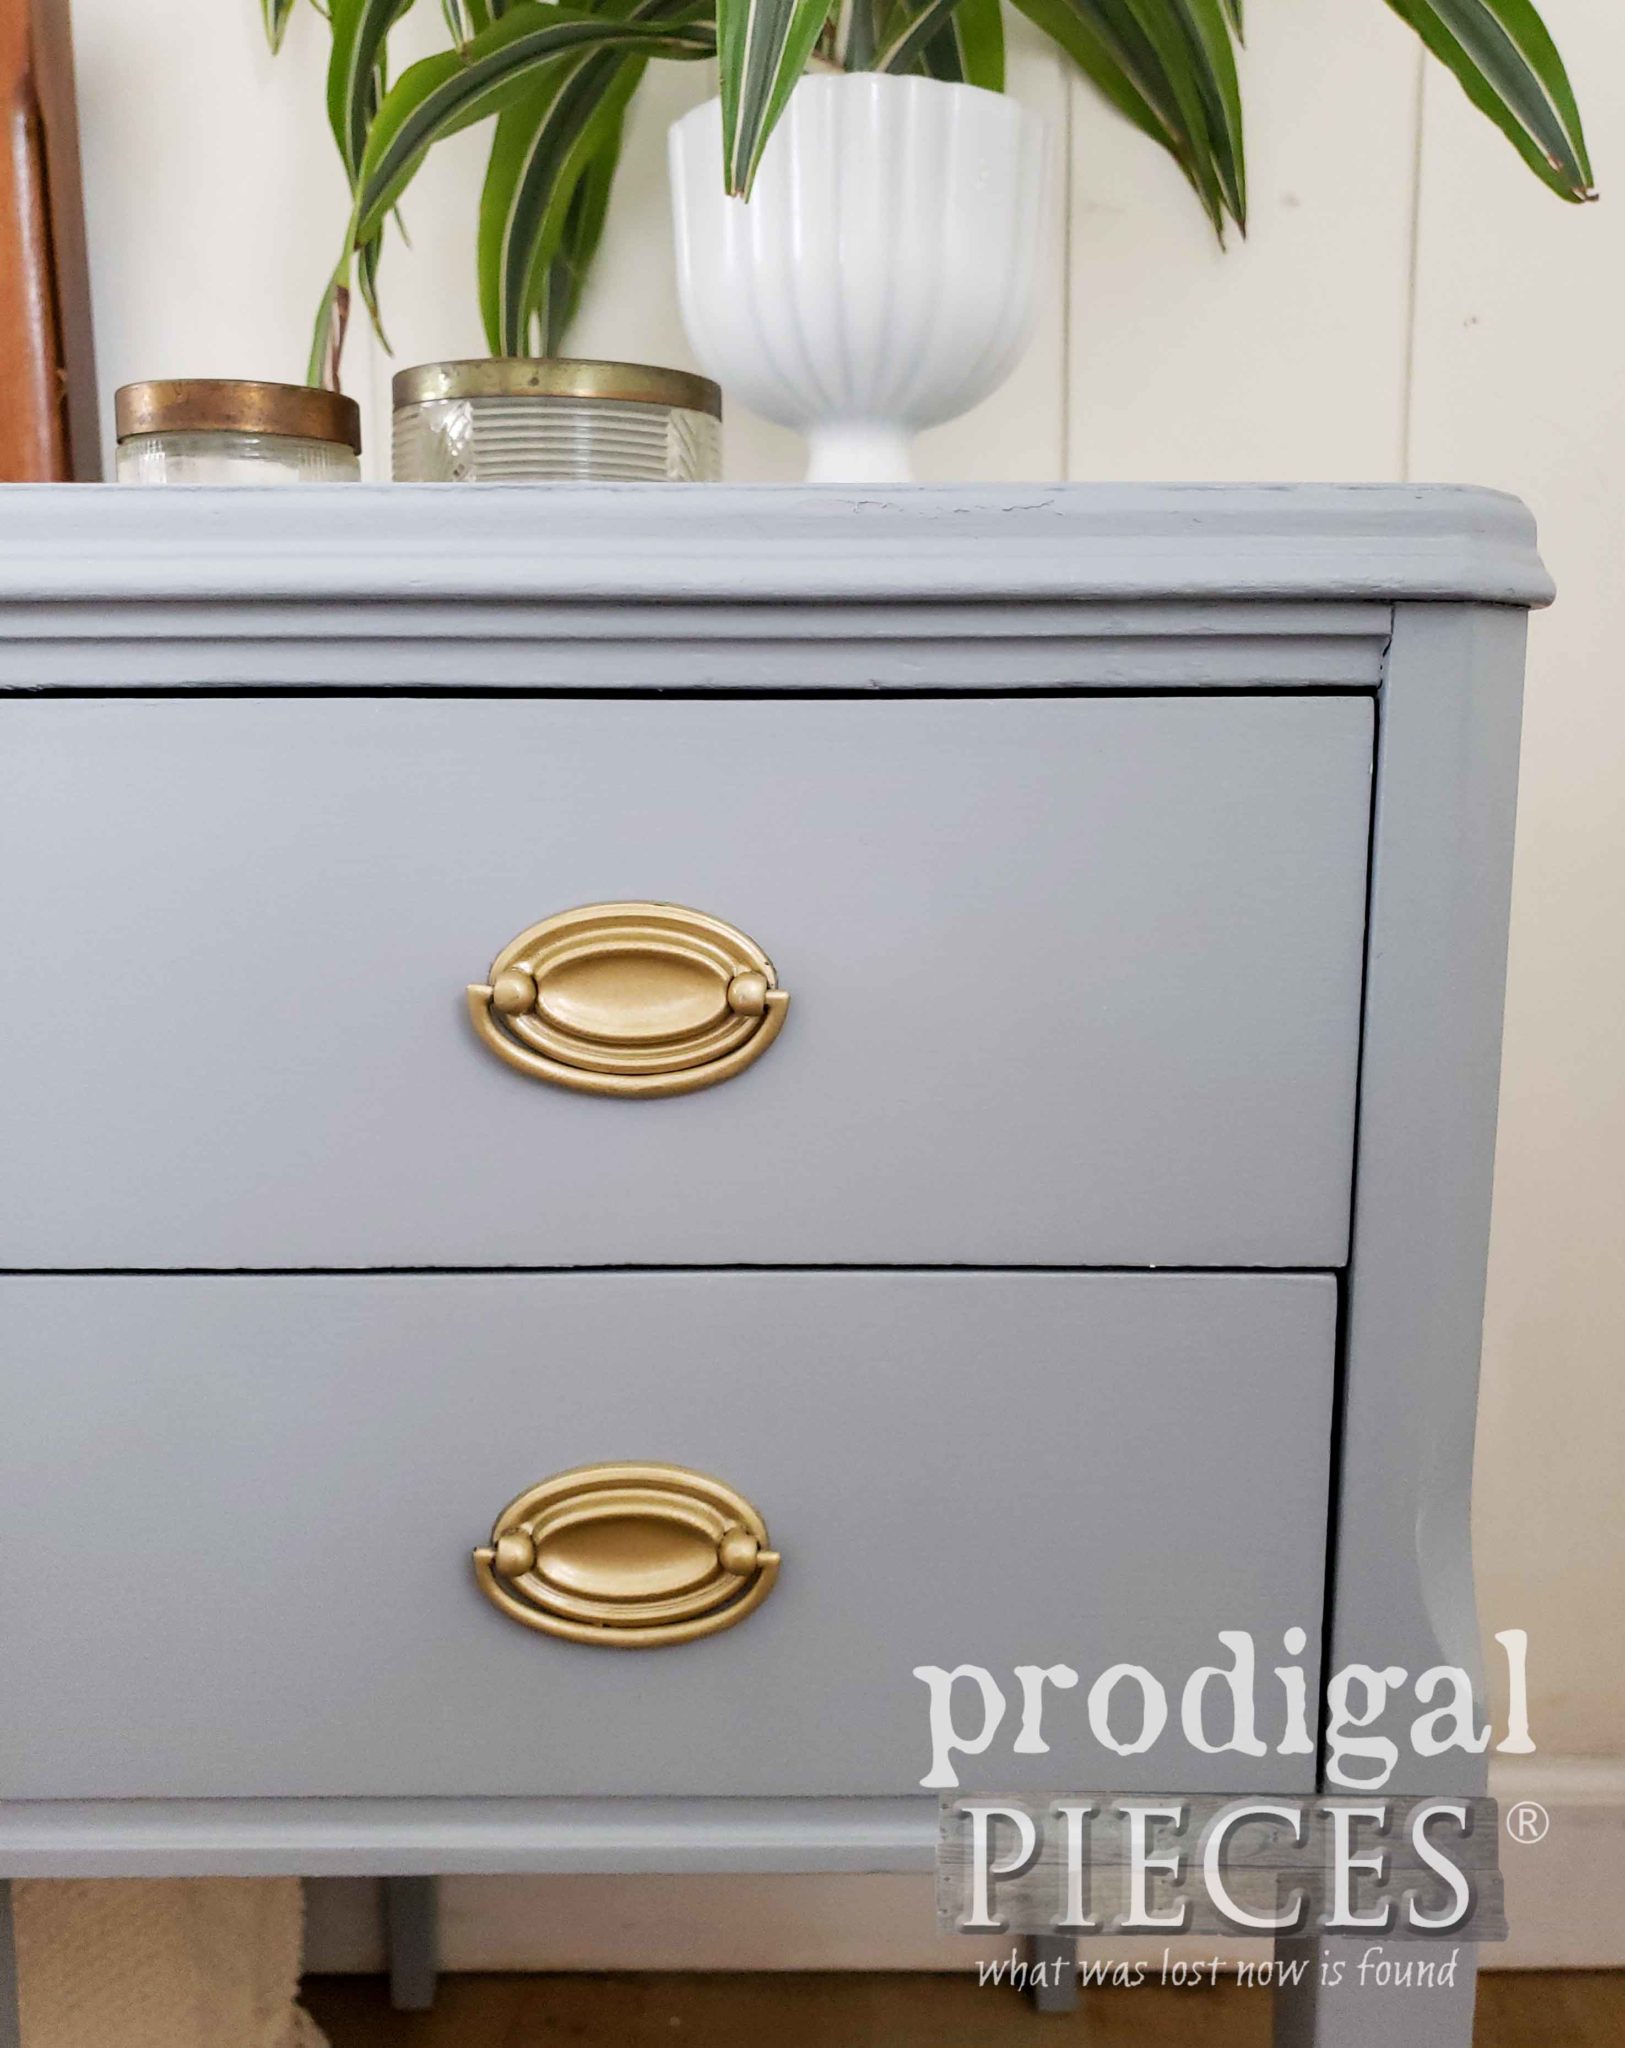 Painted Gold Drawer Pulls on Vintage Nightstand by Larissa of Prodigal Pieces | prodigalpieces.com #prodigalpieces #diy #furniture #home #vintage #homedecor